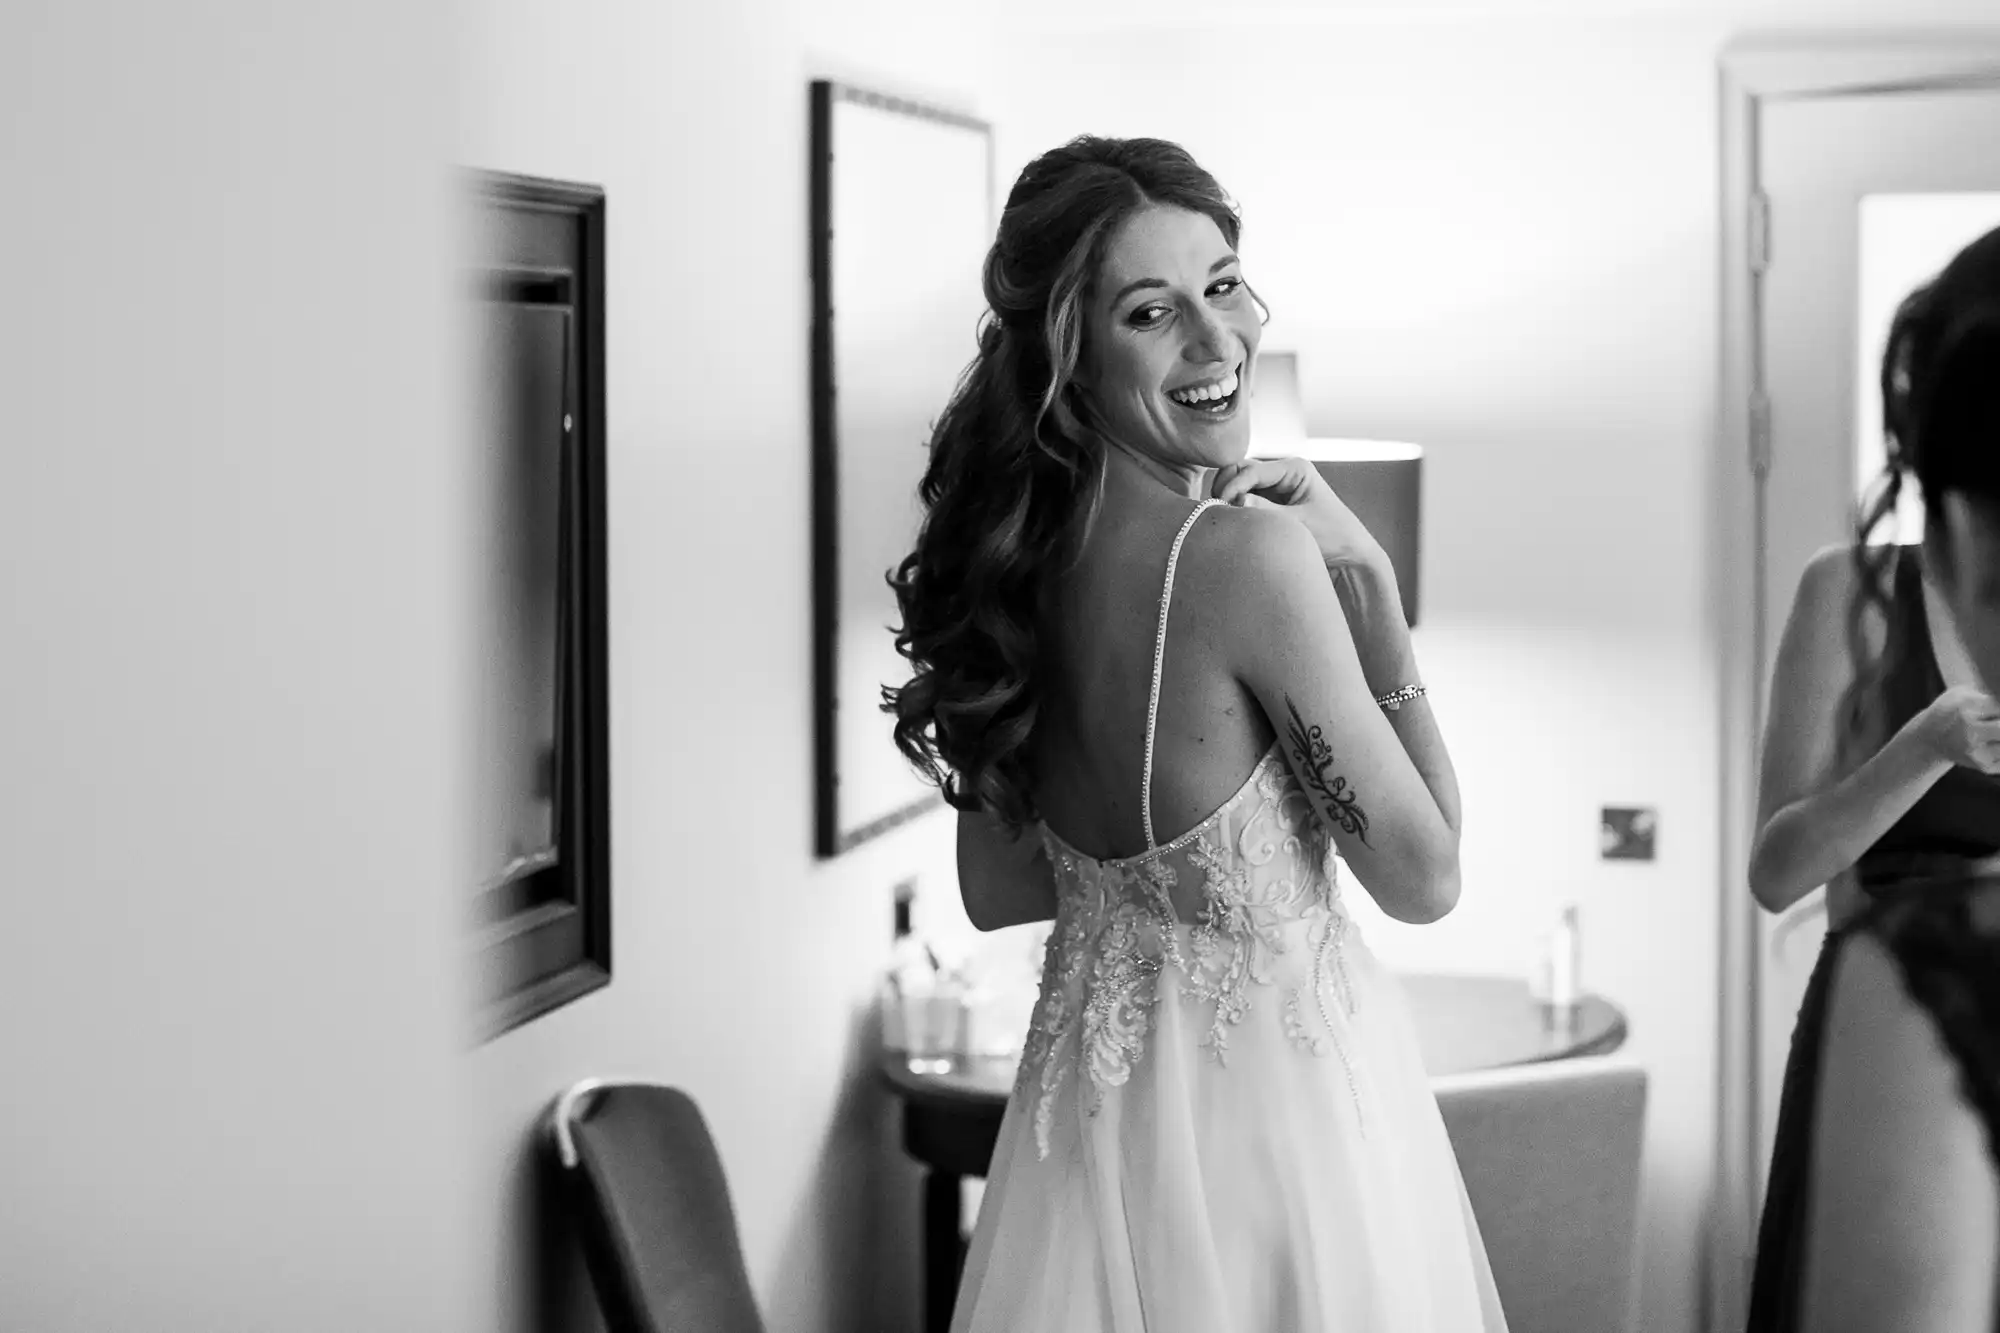 A bride in a wedding dress looks over her shoulder and smiles in a well-lit room. Another person stands nearby, partly visible.